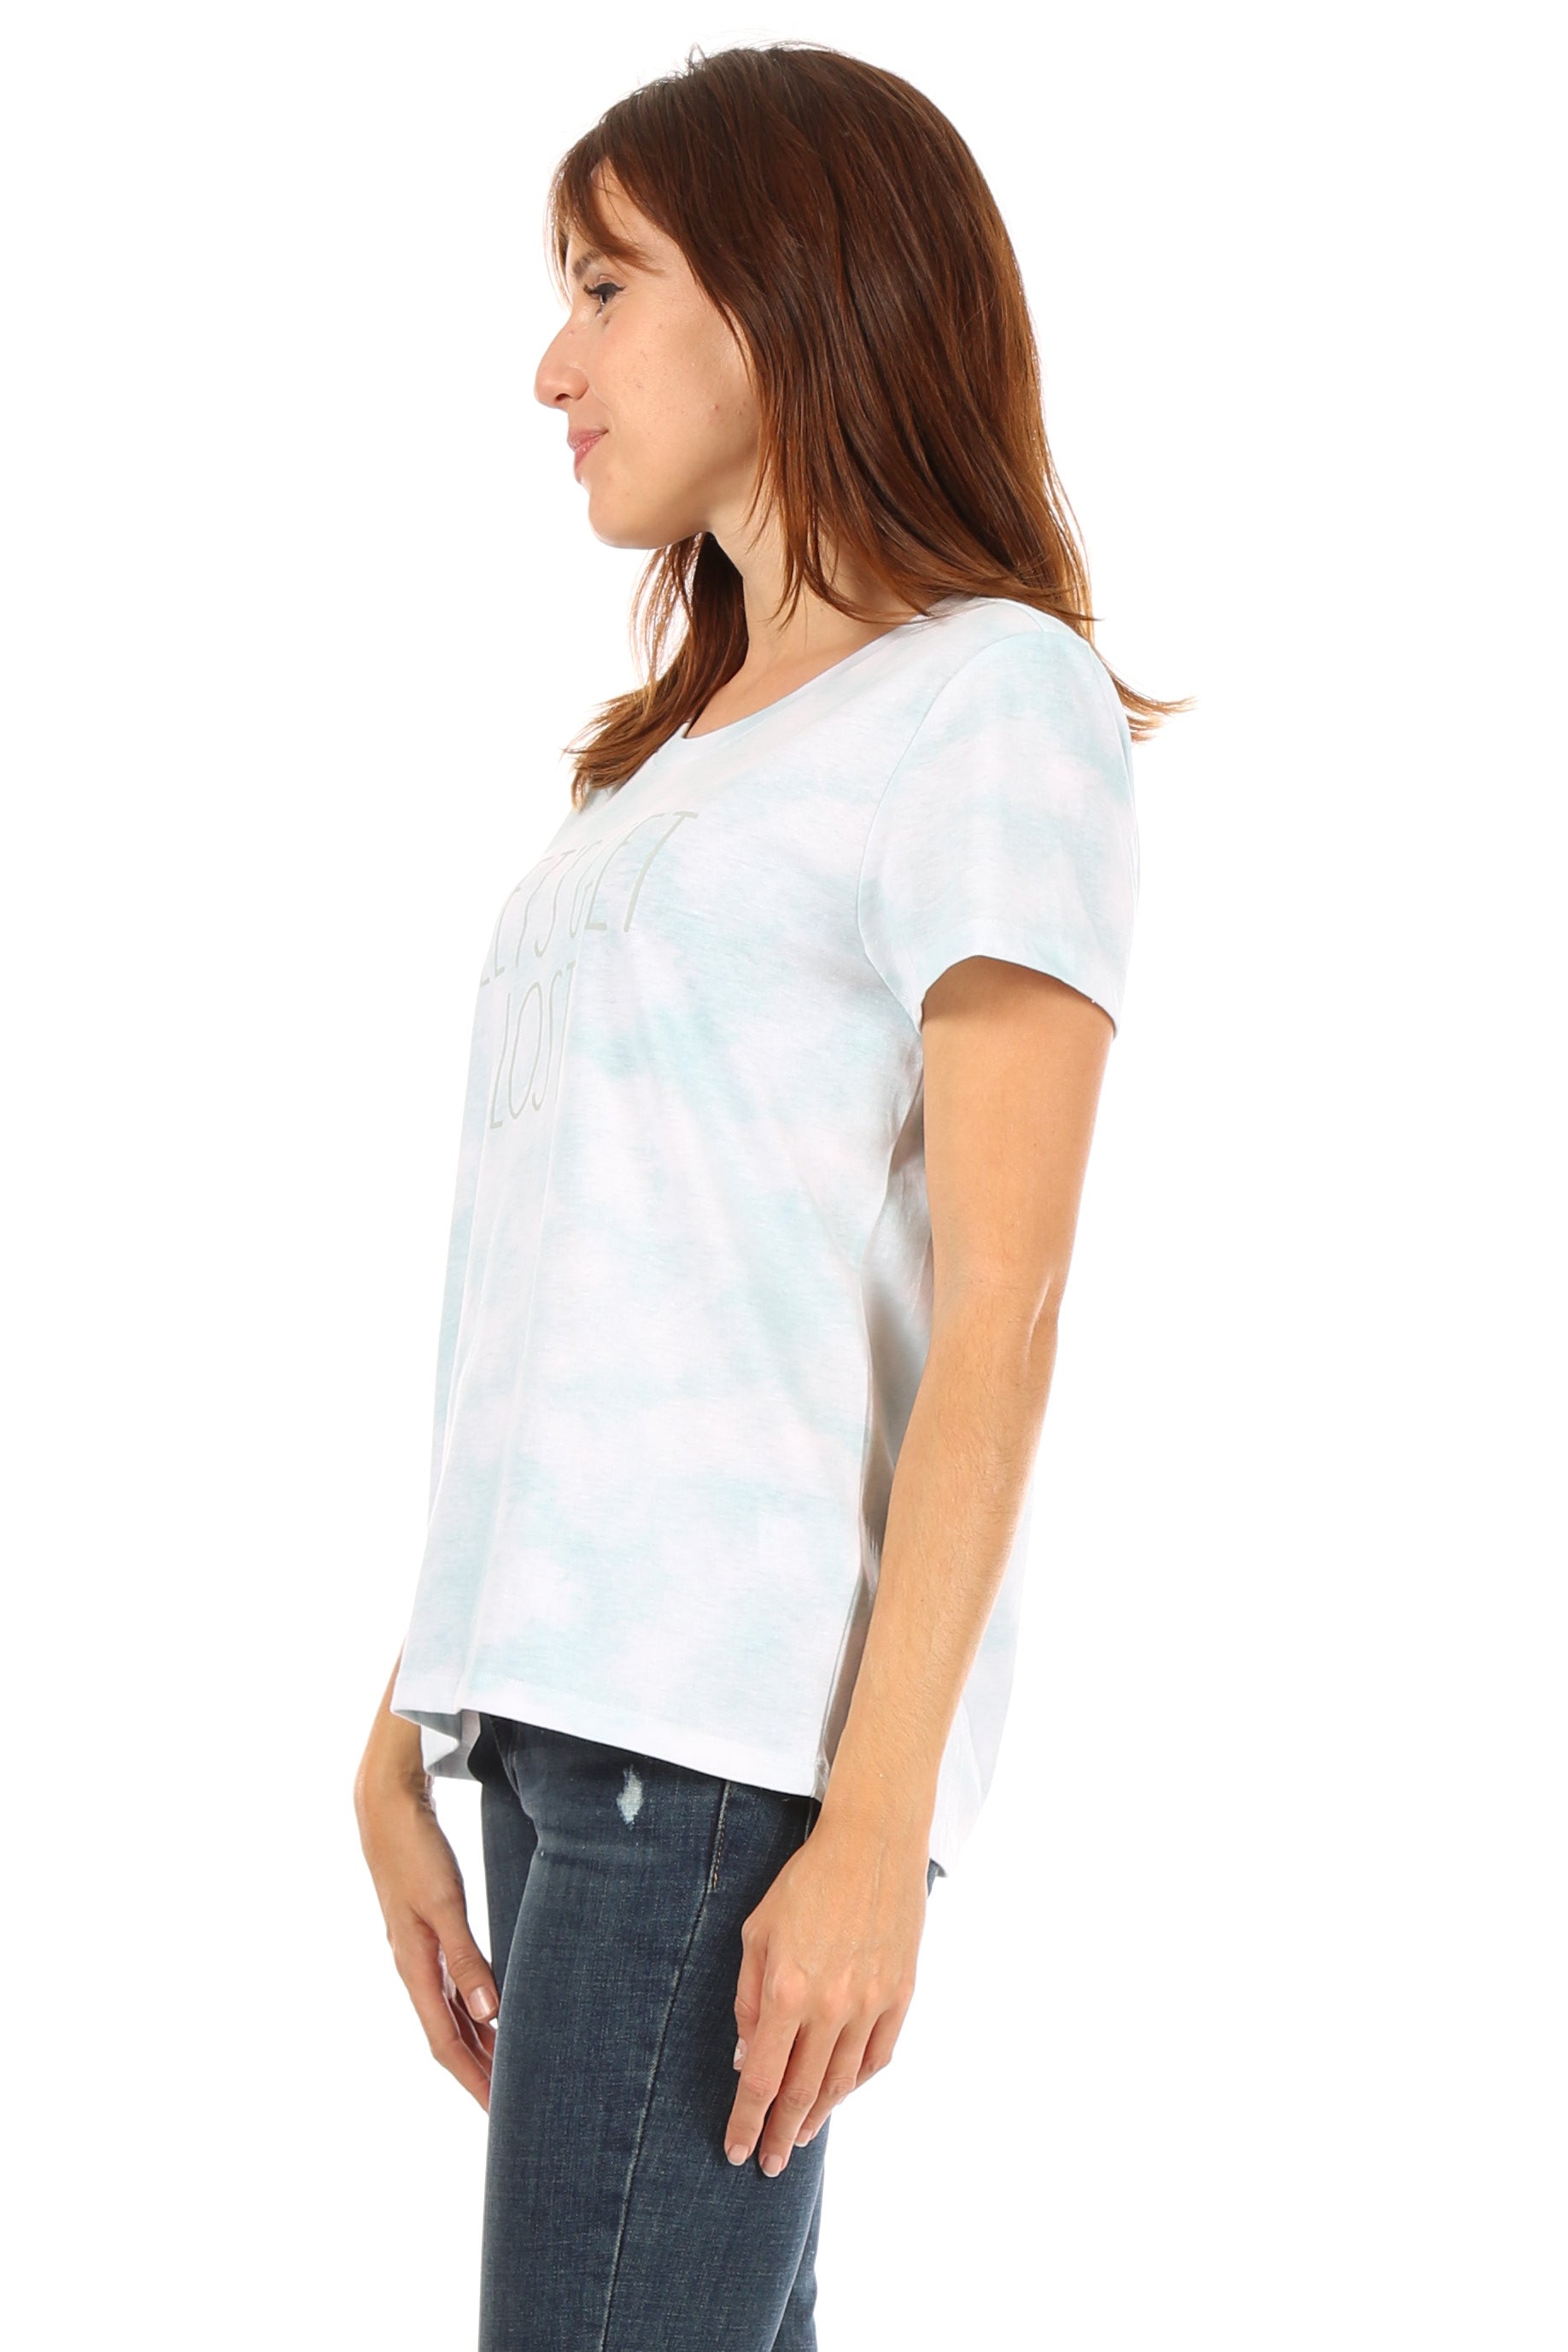 Women's "LET'S GET LOST" Short Sleeve Icon T-Shirt - Shop Rae Dunn Apparel and Sleepwear